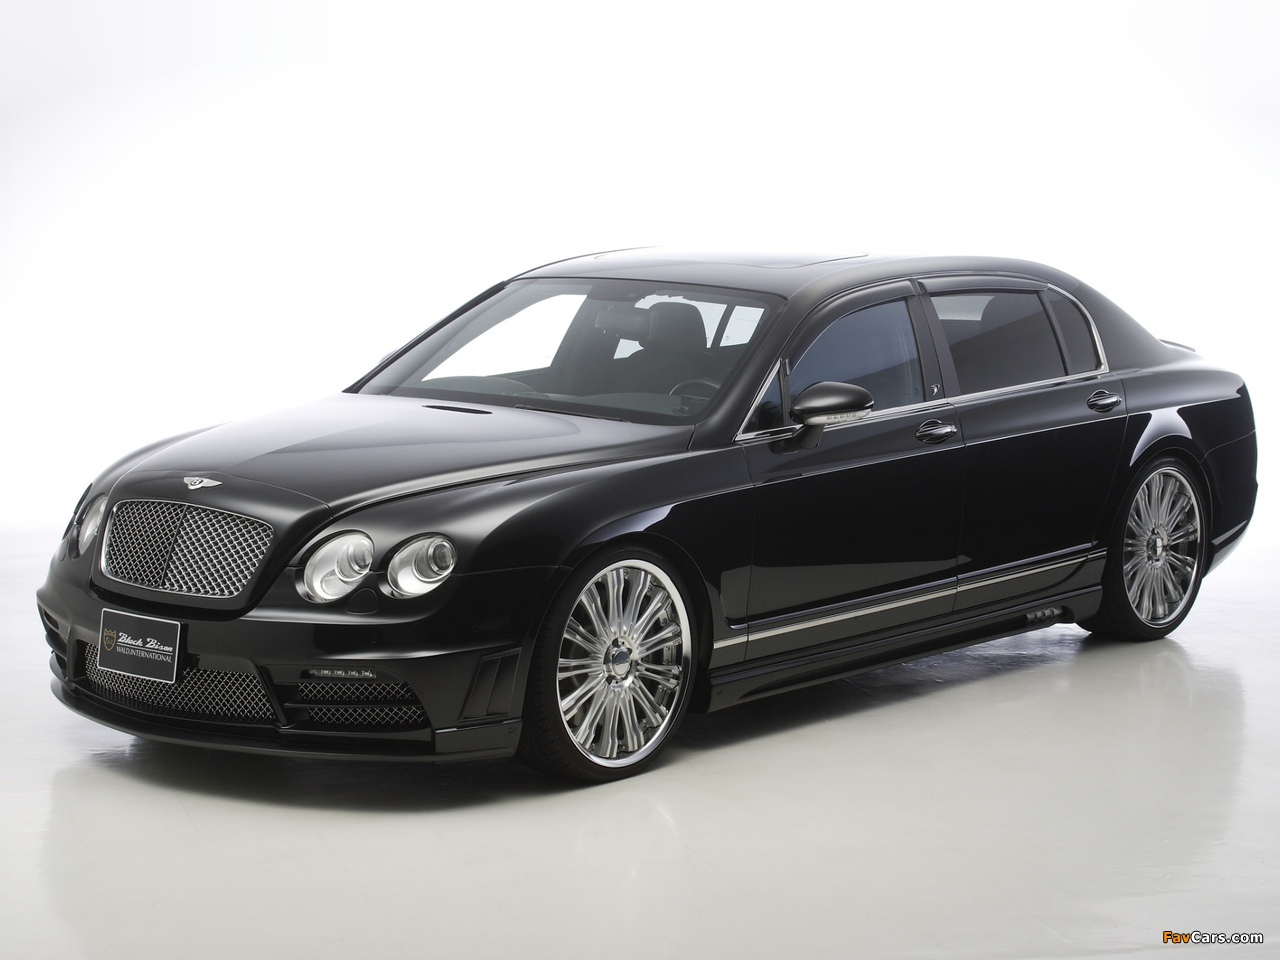 WALD Bentley Continental Flying Spur Black Bison Edition 2010 pictures (1280 x 960)